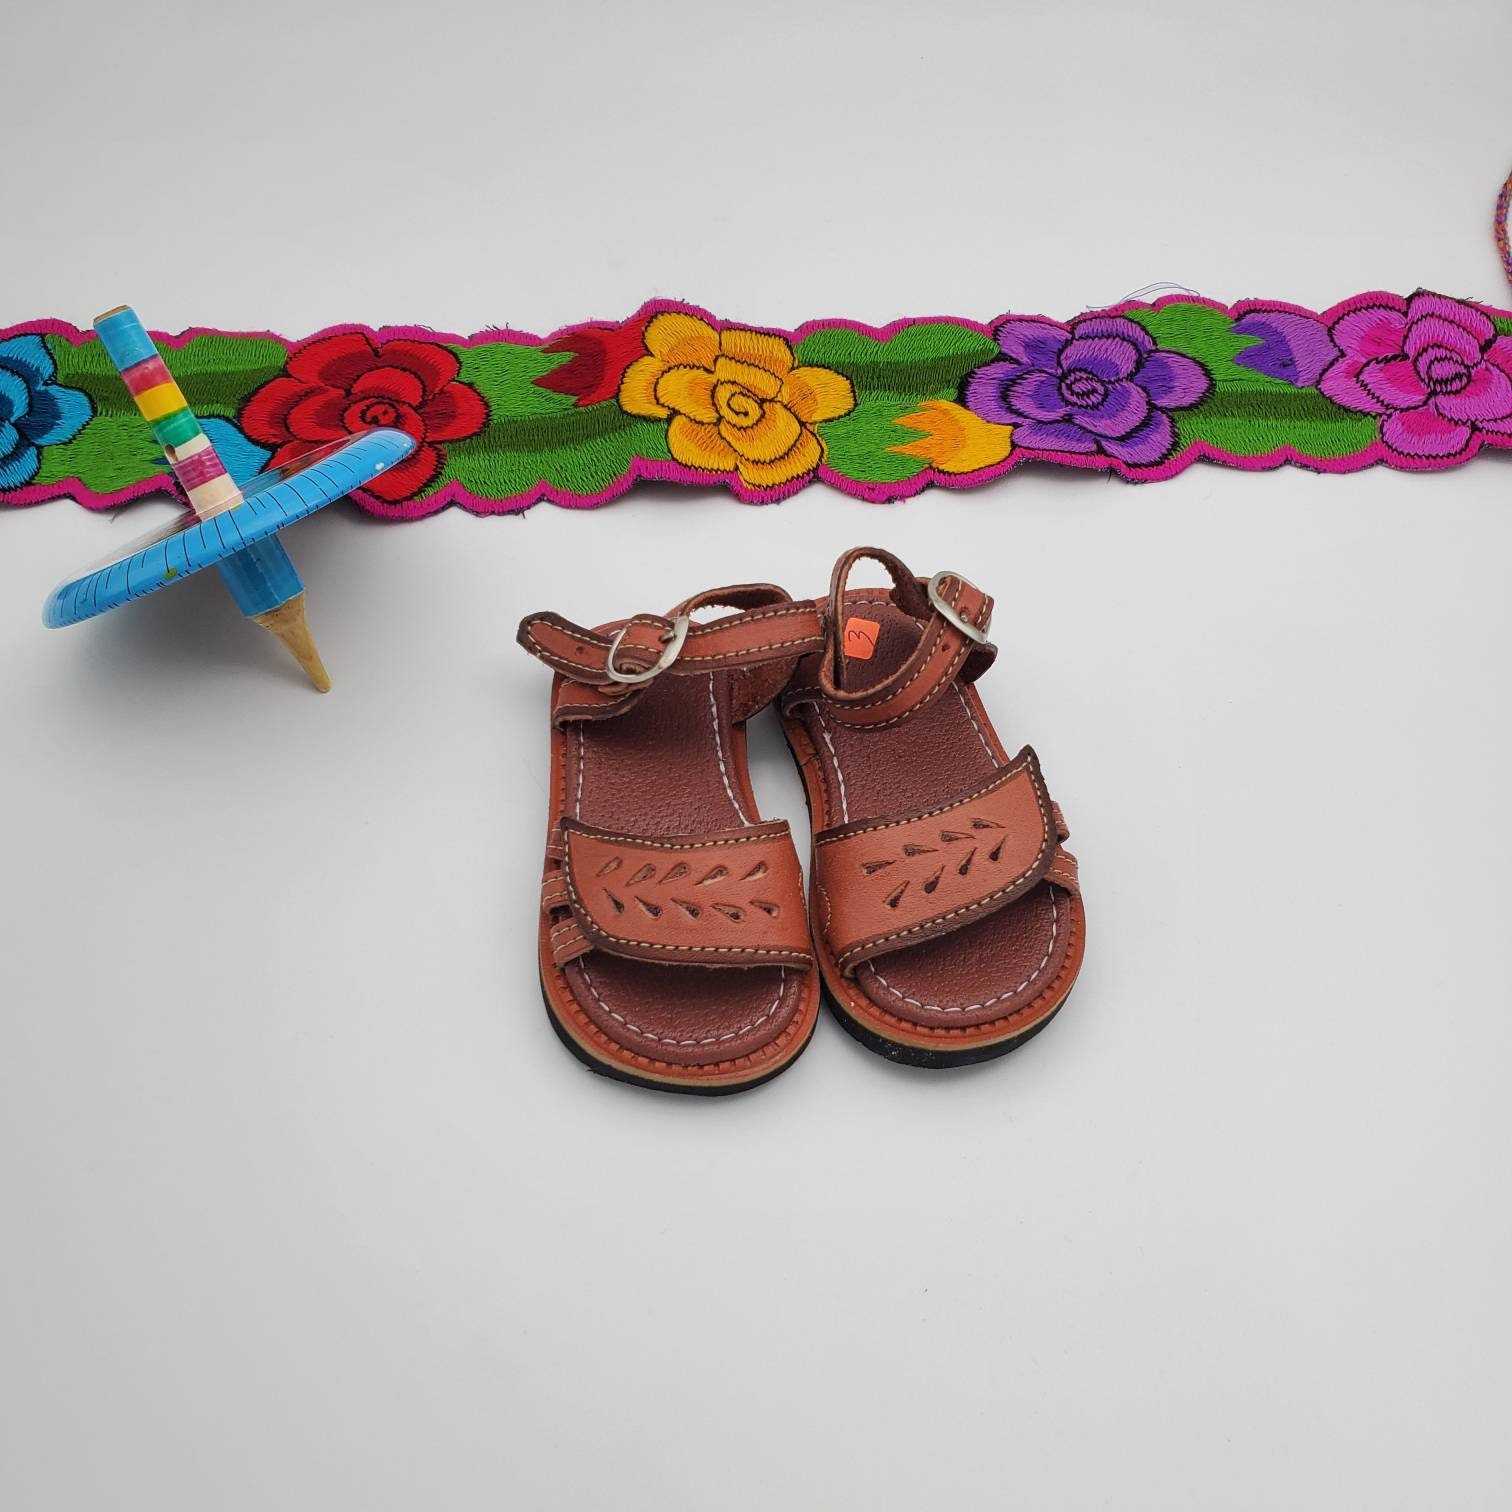 mexican huaraches for baby girl